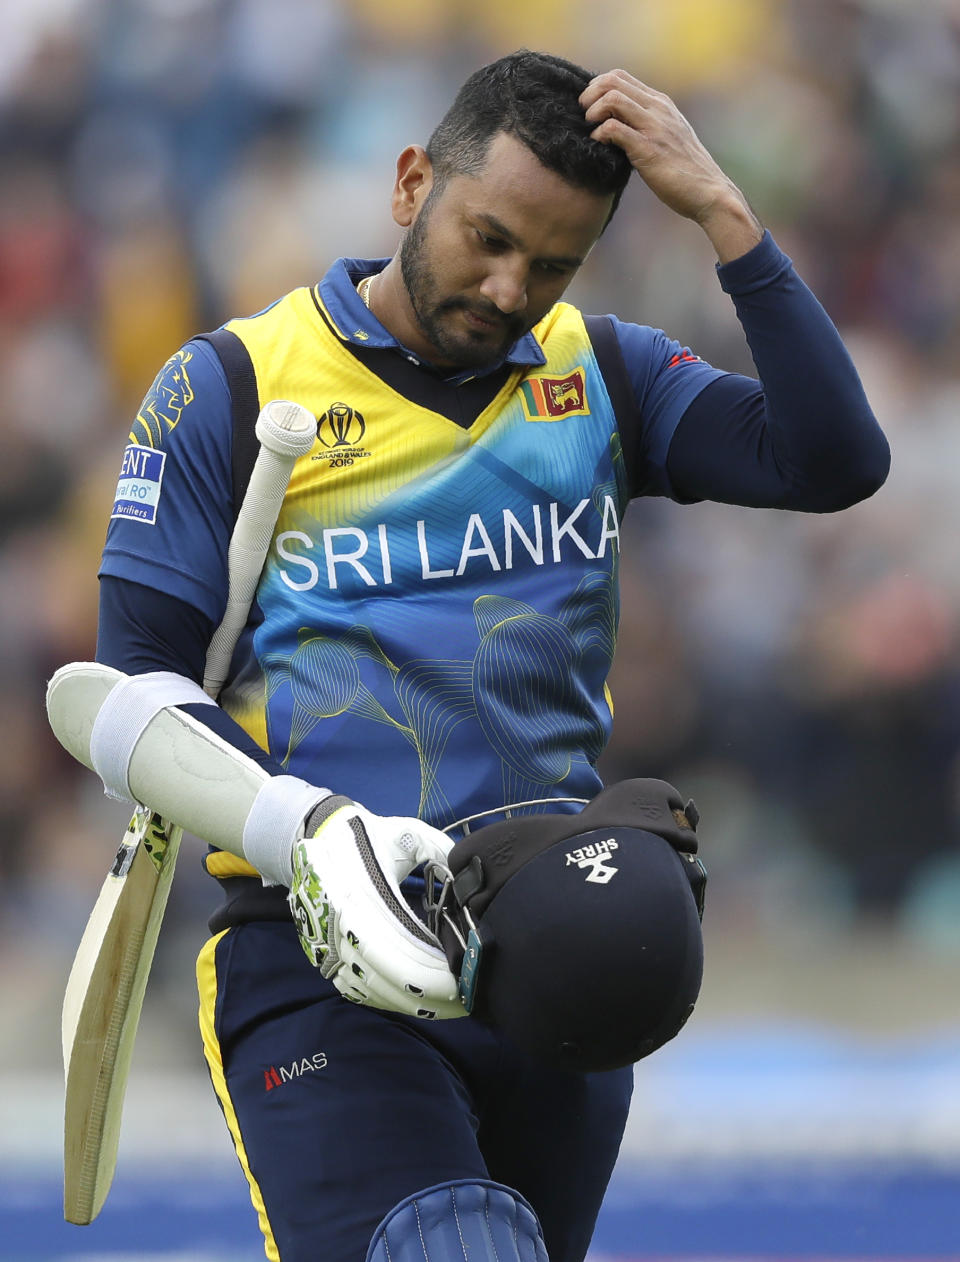 Sri Lanka's captain Dimuth Karunaratne leaves the pitch after he is caught by Australia's Glenn Maxwell for 97 during the World Cup cricket match between Sri Lanka and Australia at The Oval in London, Saturday, June 15, 2019. (AP Photo/Kirsty Wigglesworth)